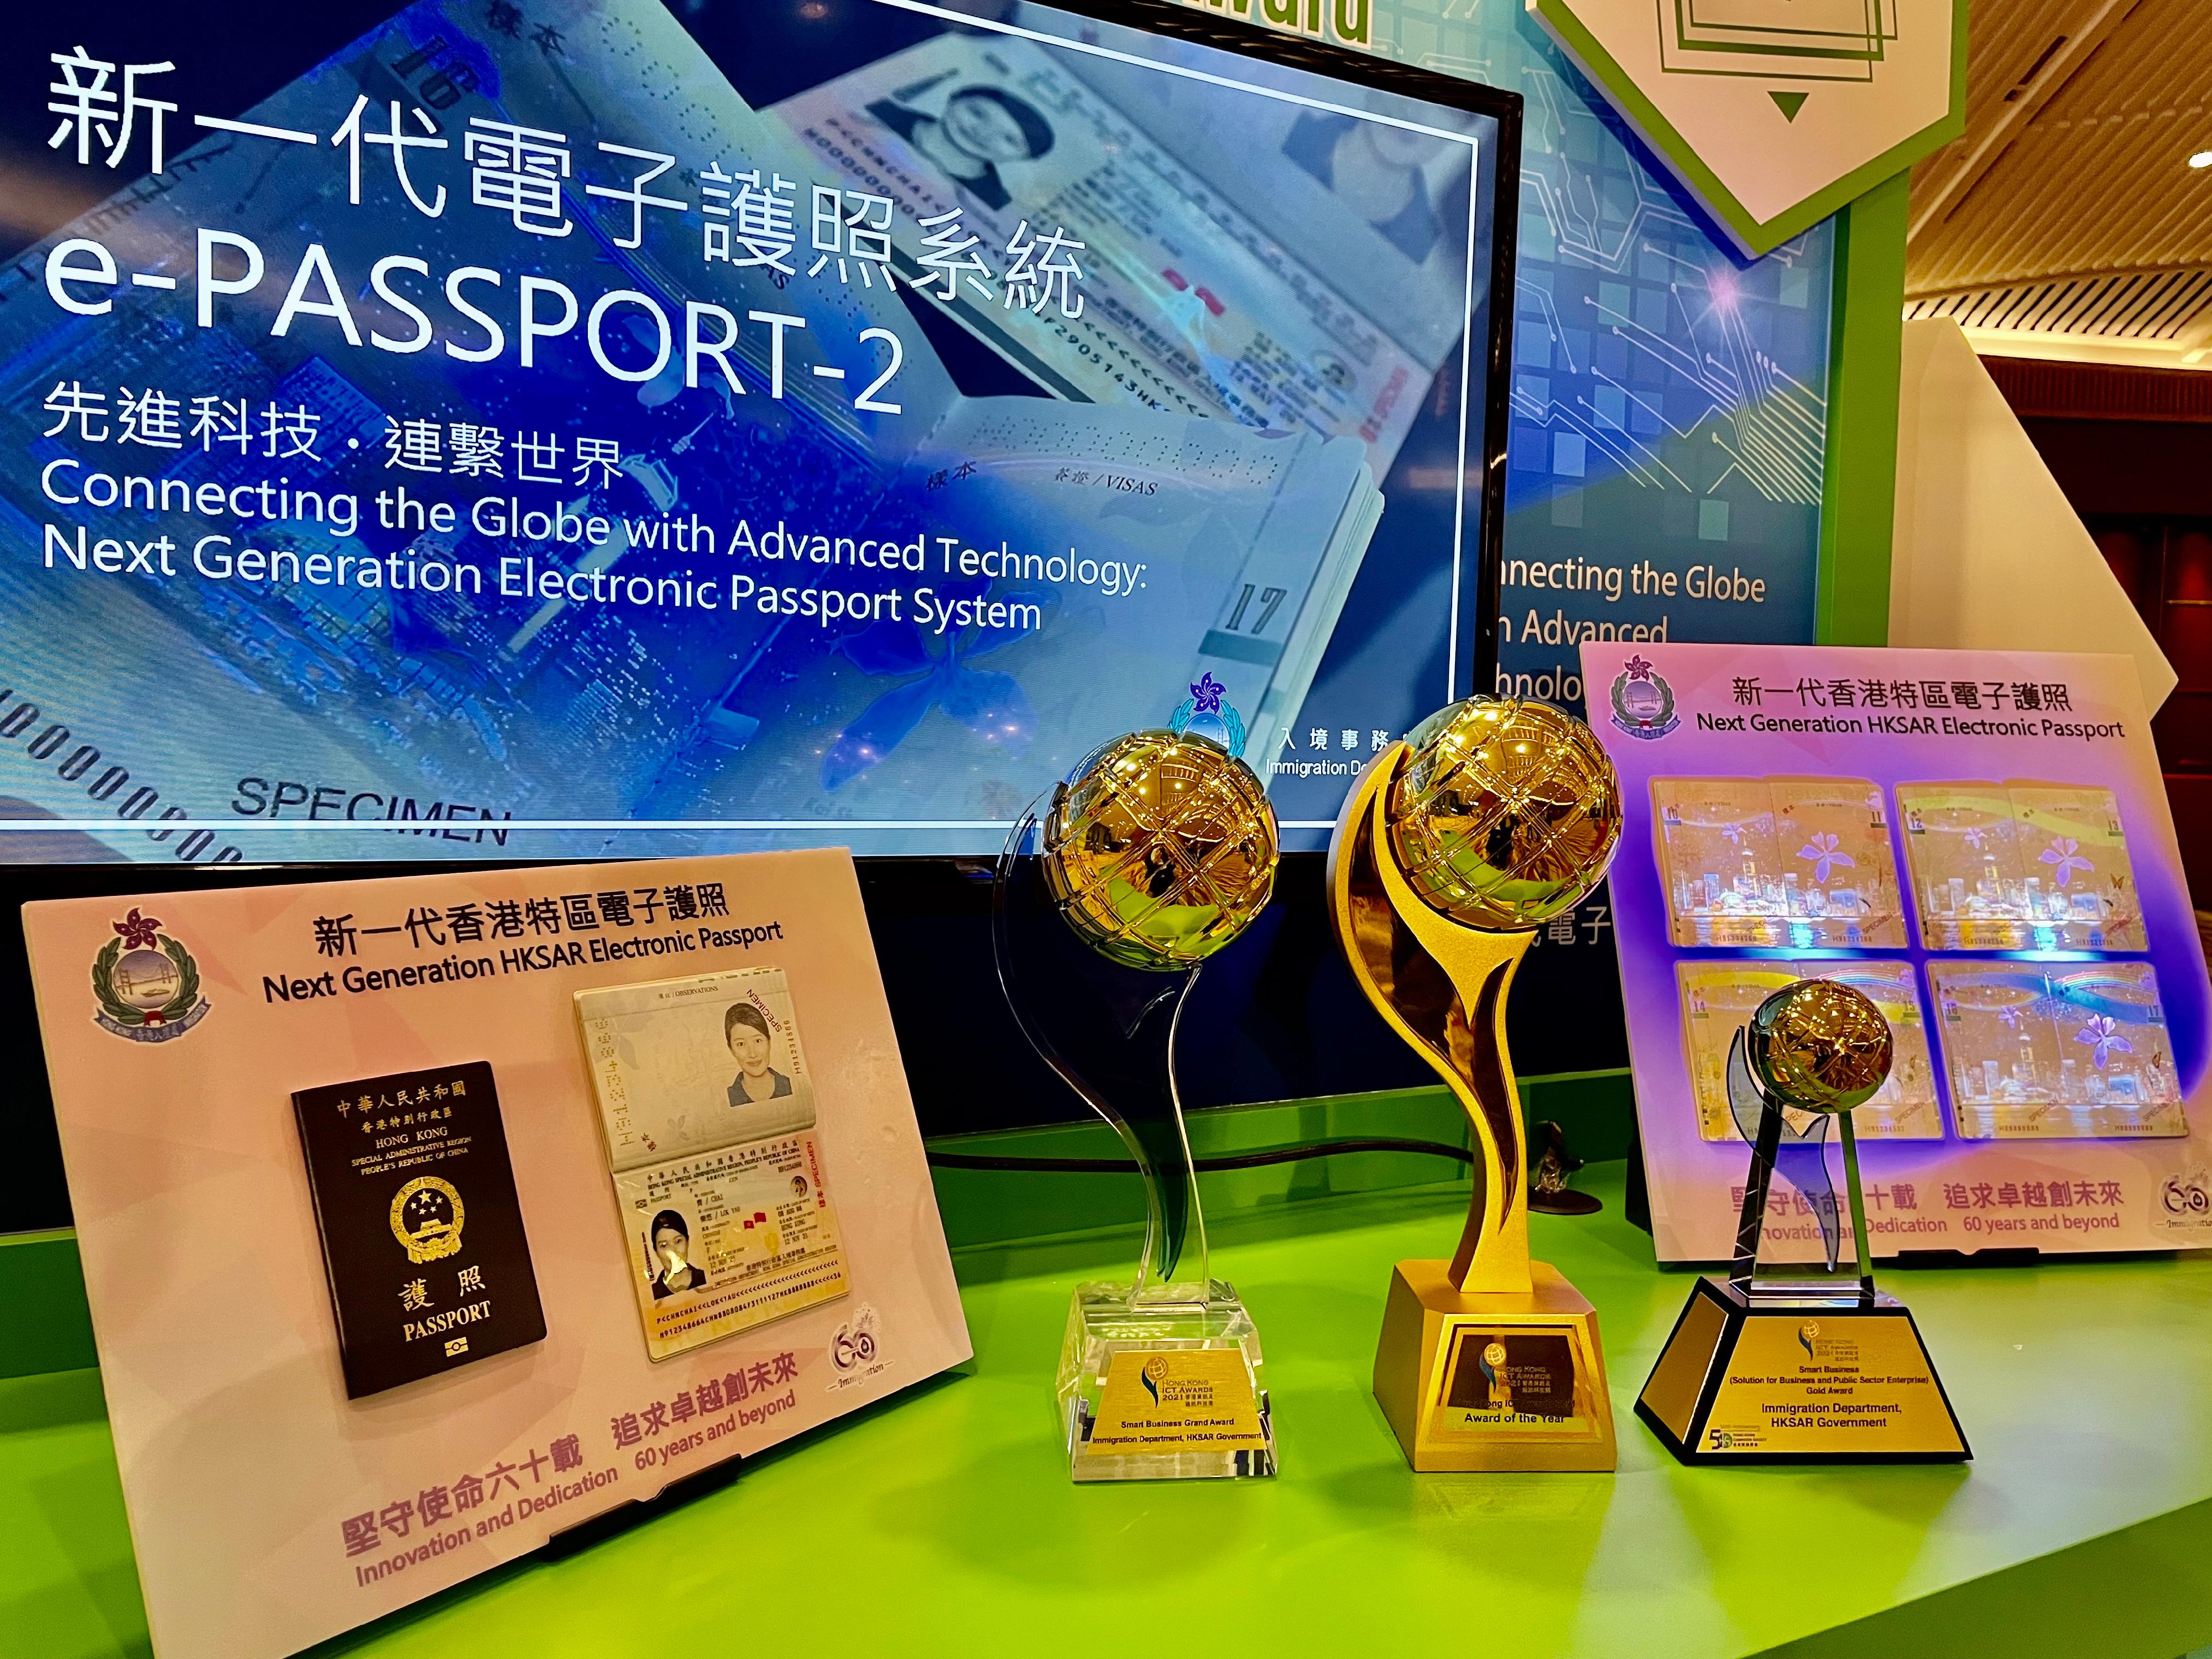 The Next Generation Electronic Passport System introduced by the Hong Kong Immigration Department has won the Award of the Year, the Smart Business Grand Award and the Smart Business (Solution for Business and Public Sector Enterprise) Gold Award of the Hong Kong ICT Awards 2021. The awards presentation ceremony was held at the Hong Kong Convention and Exhibition Centre today (November 29). Photo shows the Smart Business Grand Award (left), the Award of the Year (centre) and the Smart Business (Solution for Business and Public Sector Enterprise) Gold Award (right) of the Hong Kong ICT Awards 2021.